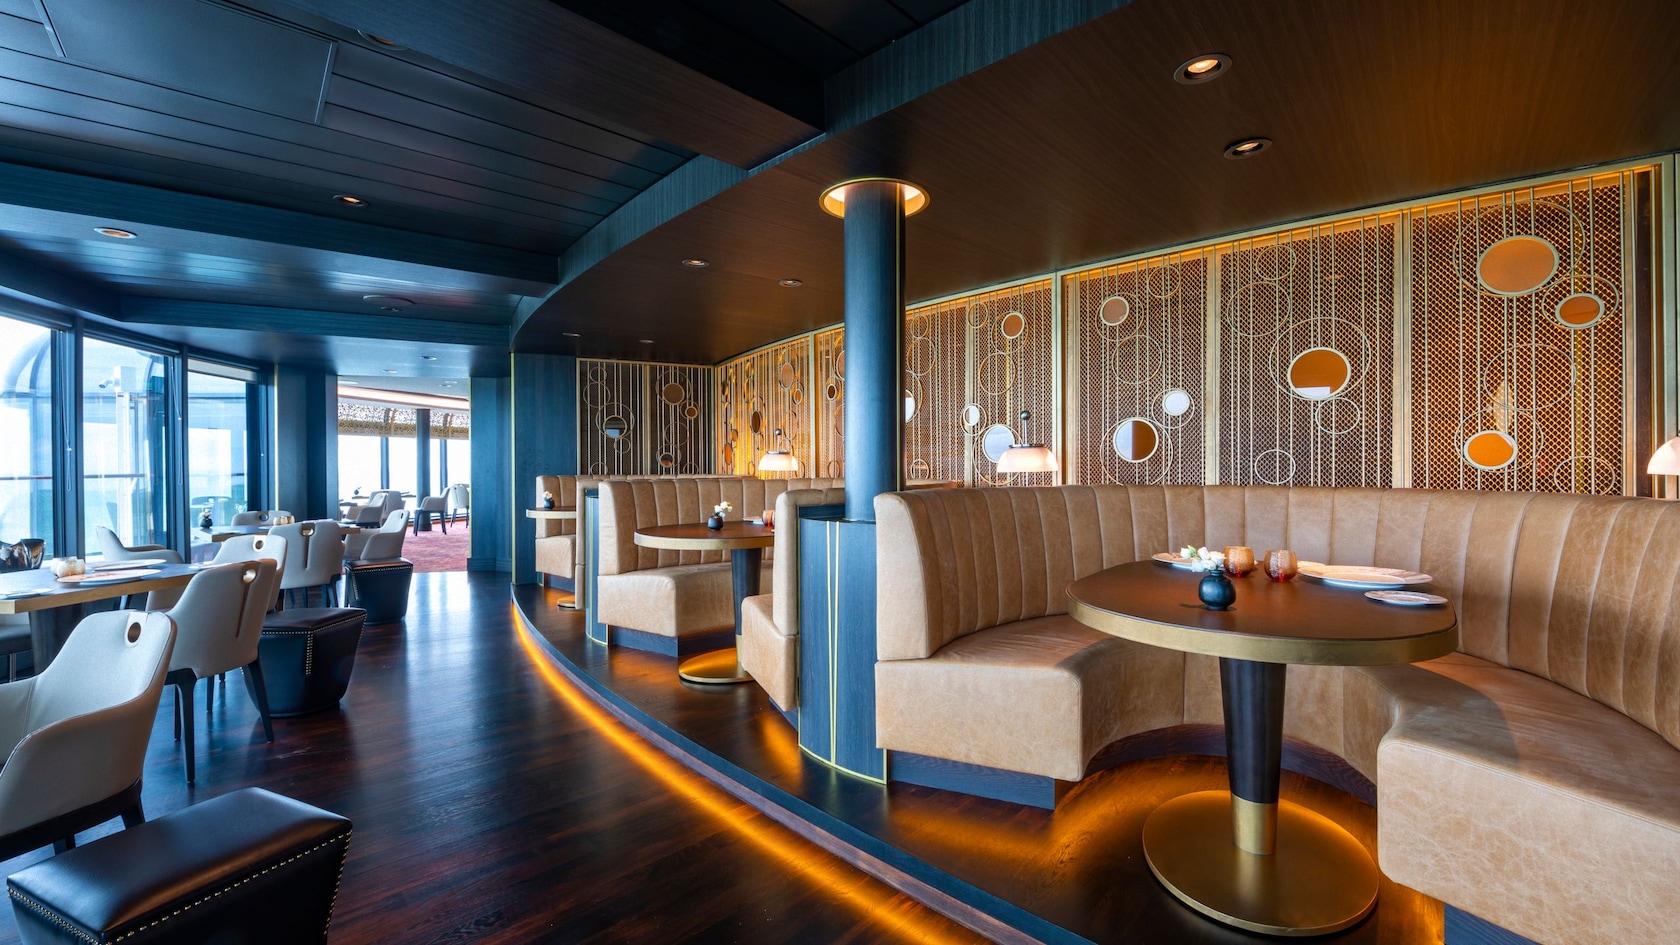 A modern steakhouse setting with ocean views, circular leather booths and contemporary tables and chairs